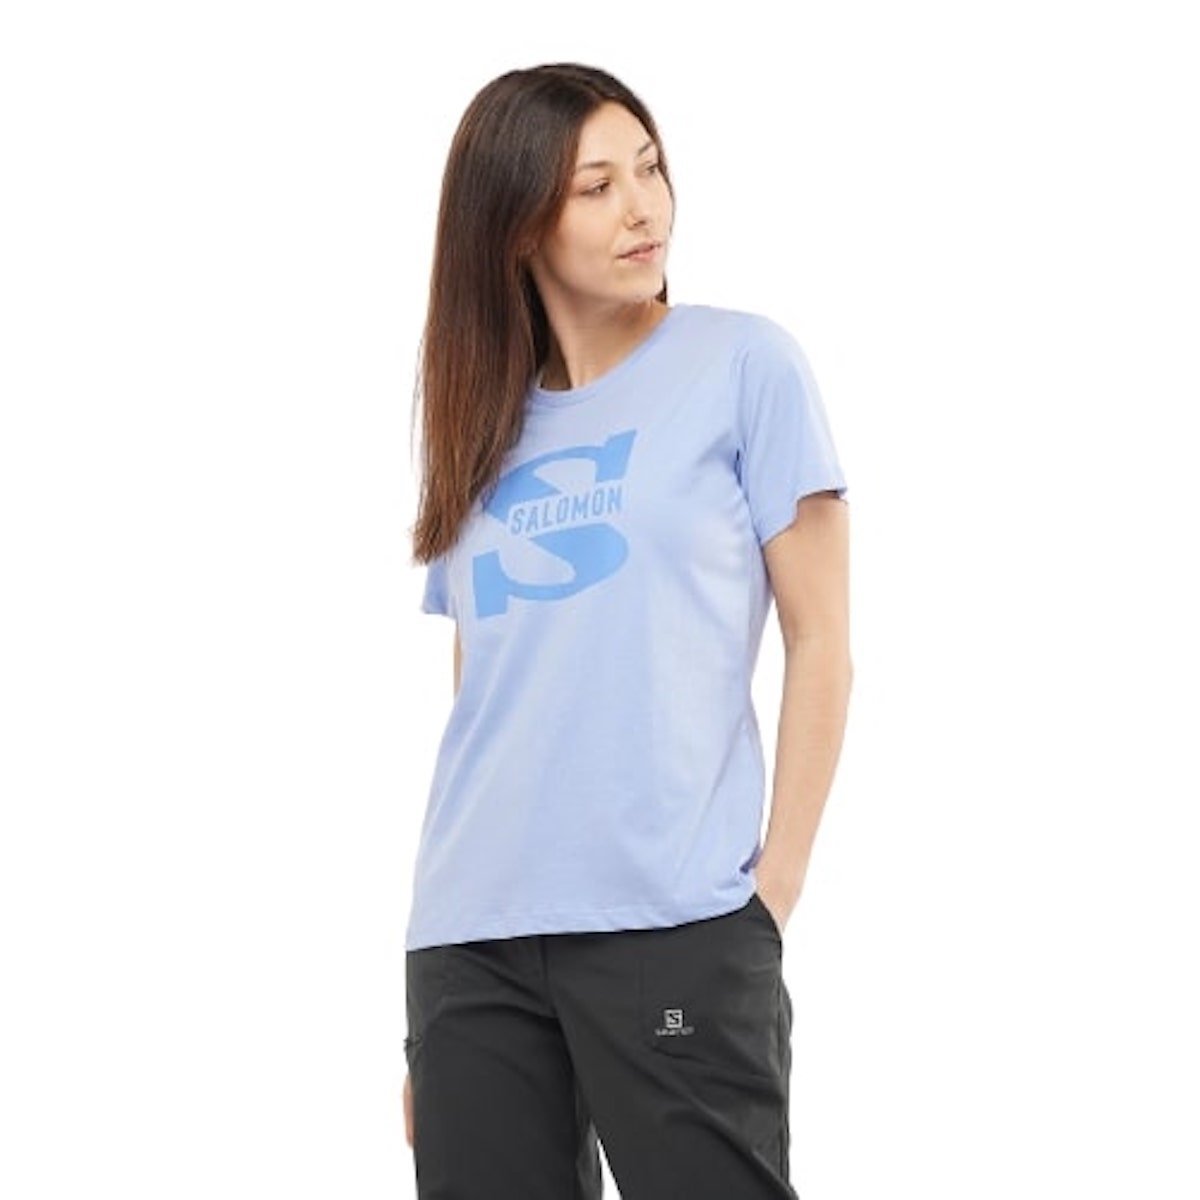 LC1798200_0_MOD_outlifebiglogotee_serenity_sportswear_w.png.cq5dam.web.1200.1200-removebg-preview